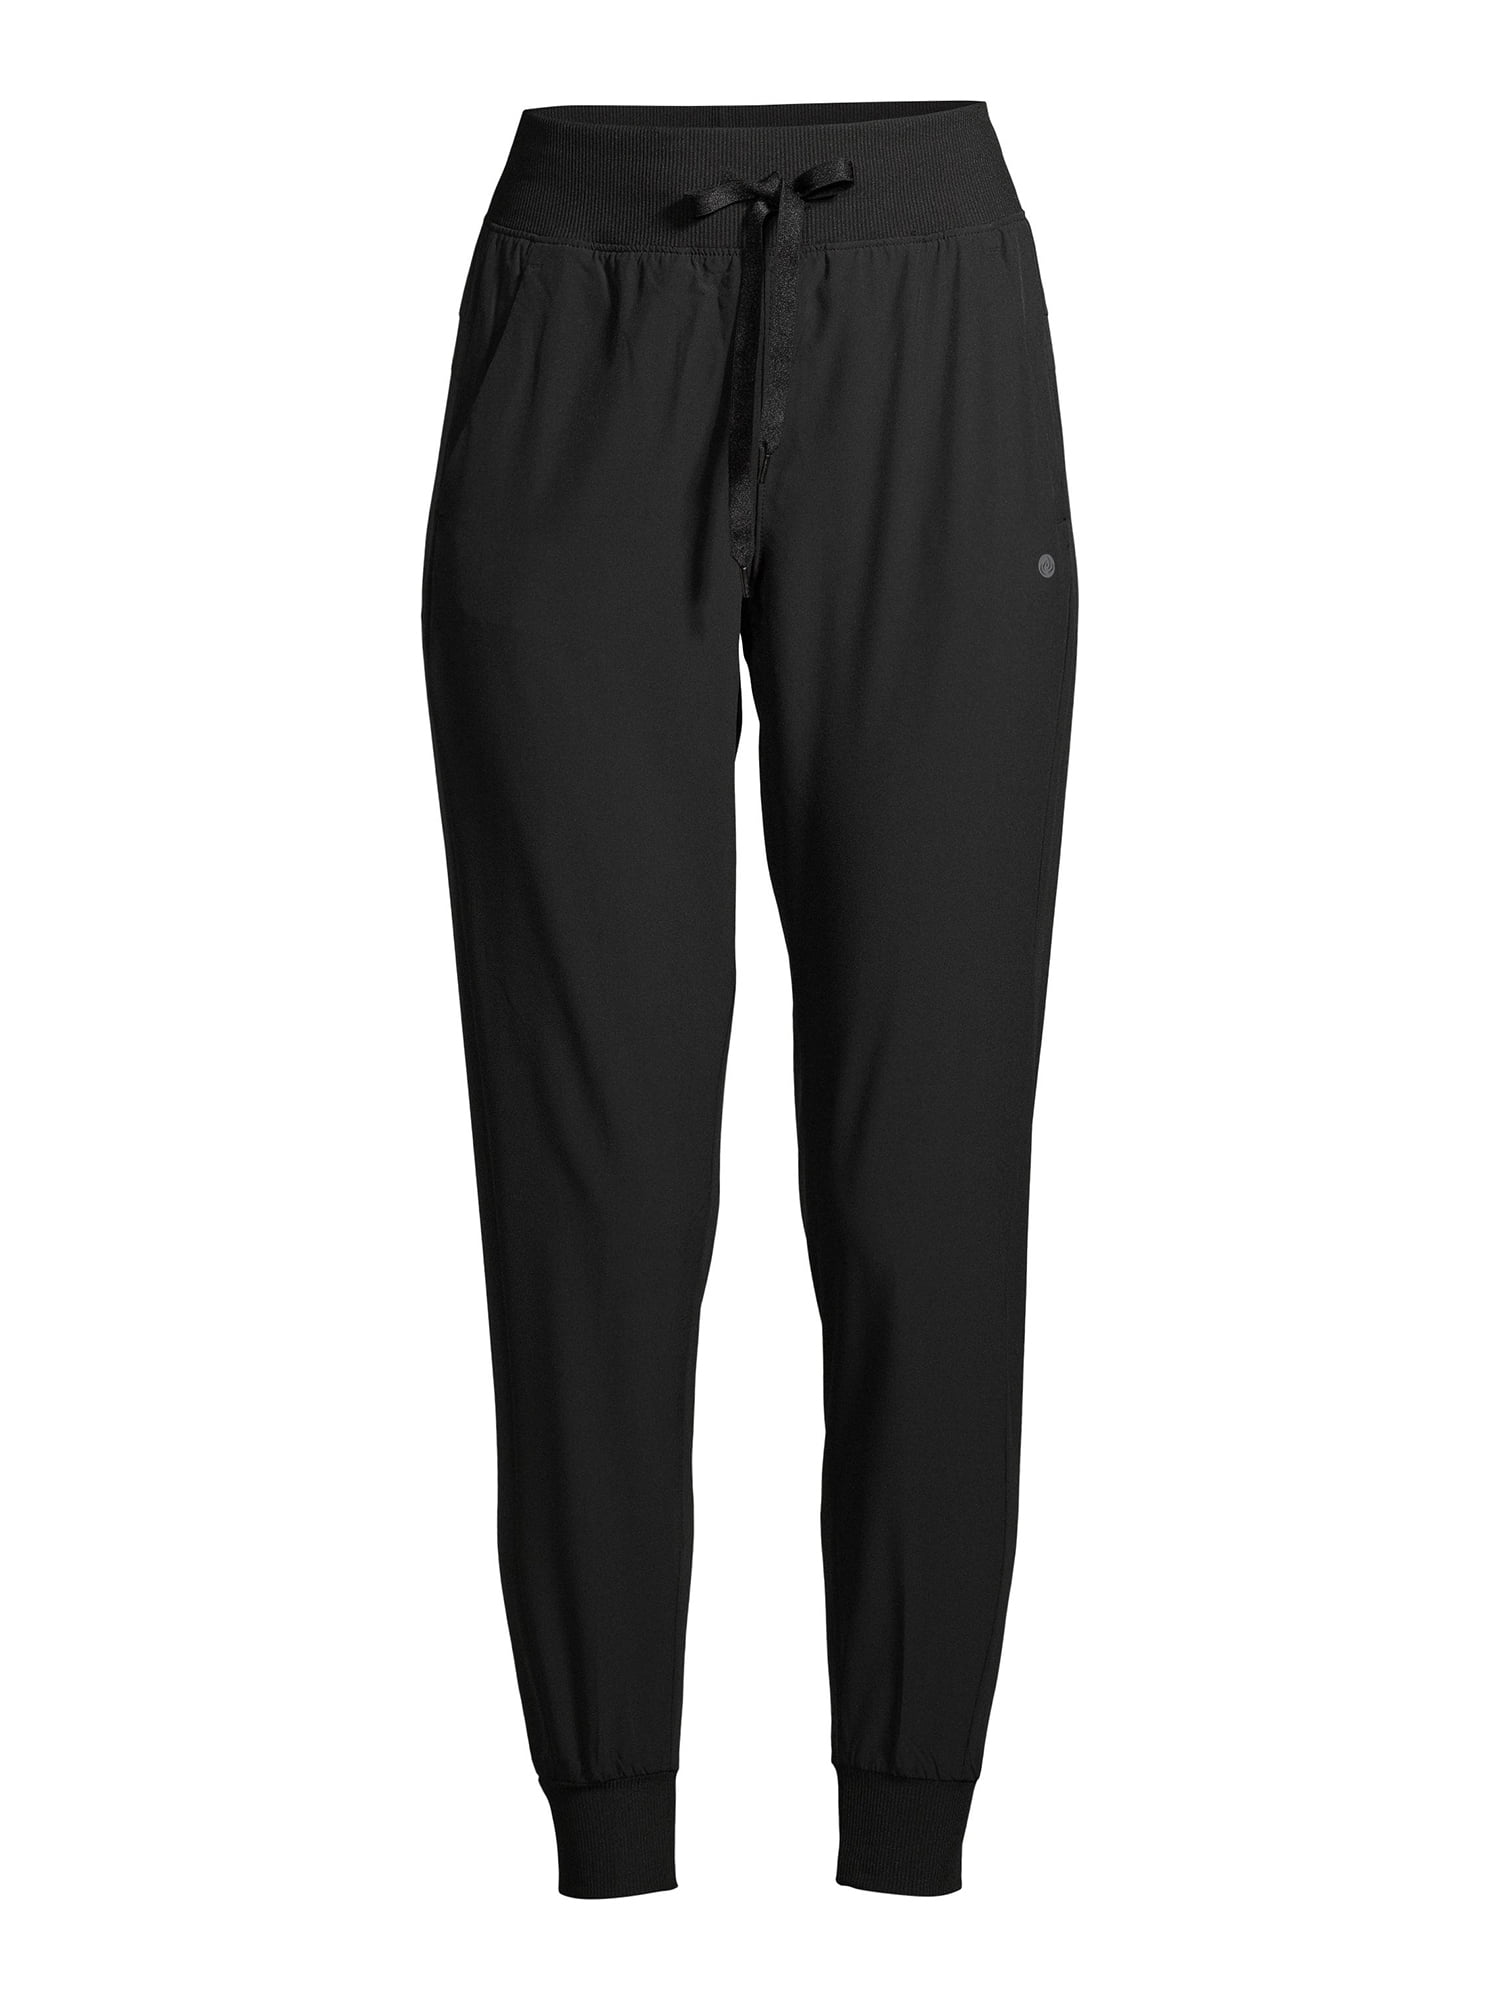 Apana Green Athletic Pants for Women